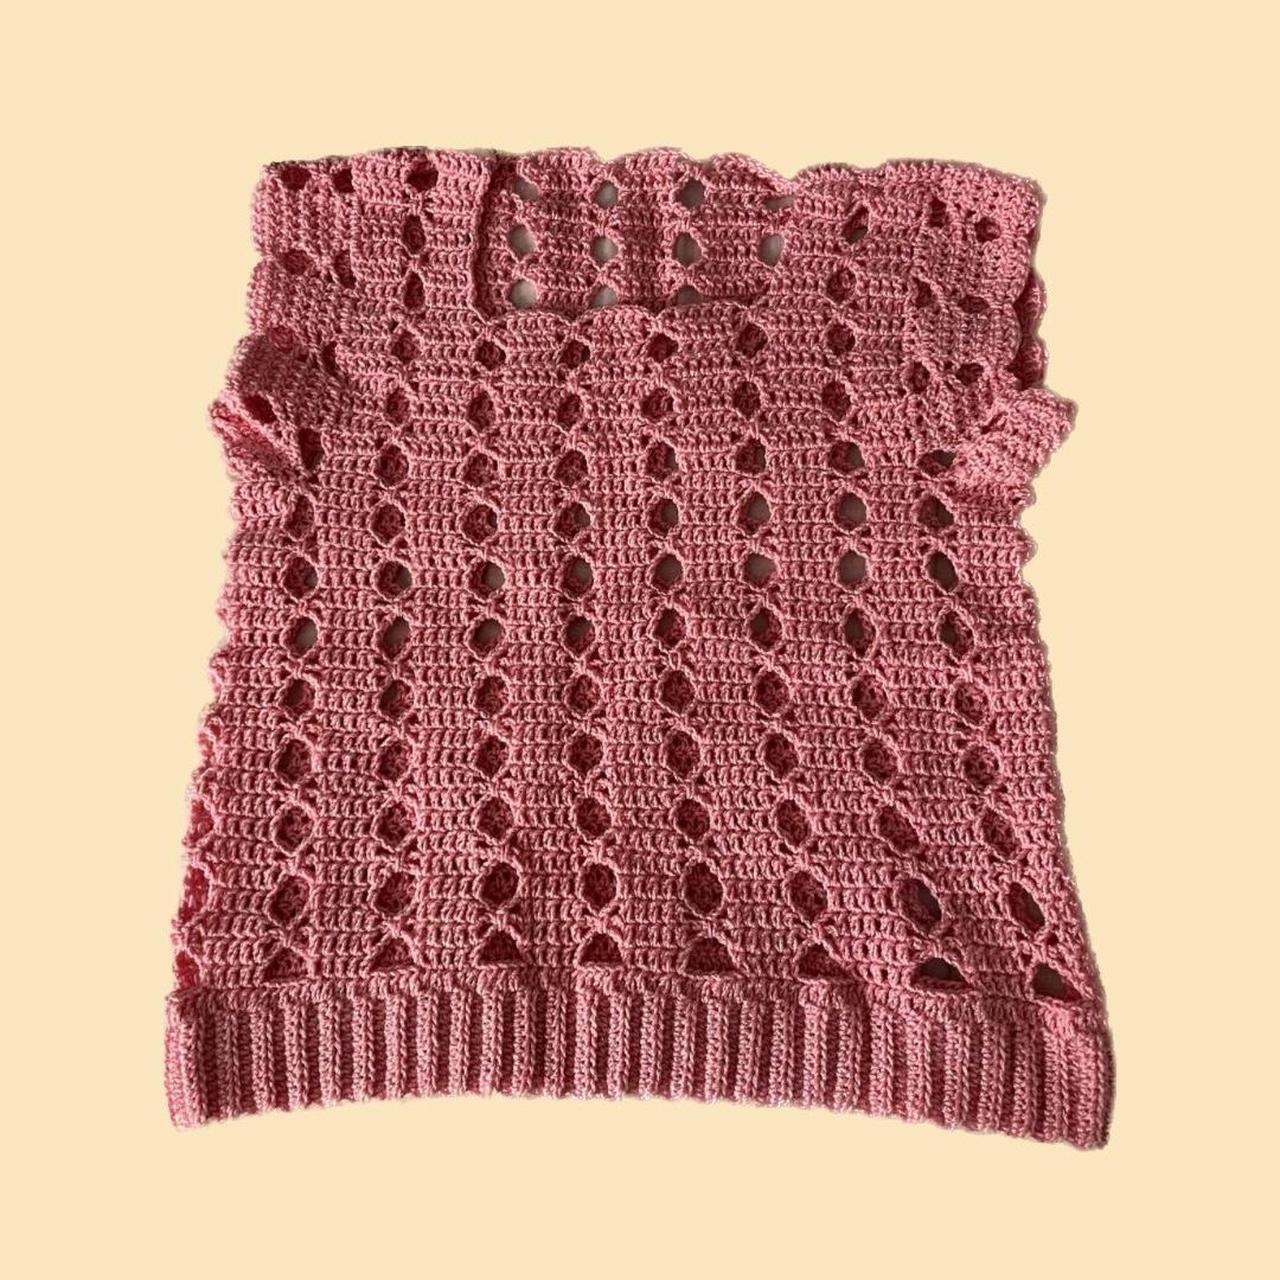 Product Image 1 - Pink knitted square neck top

🛍